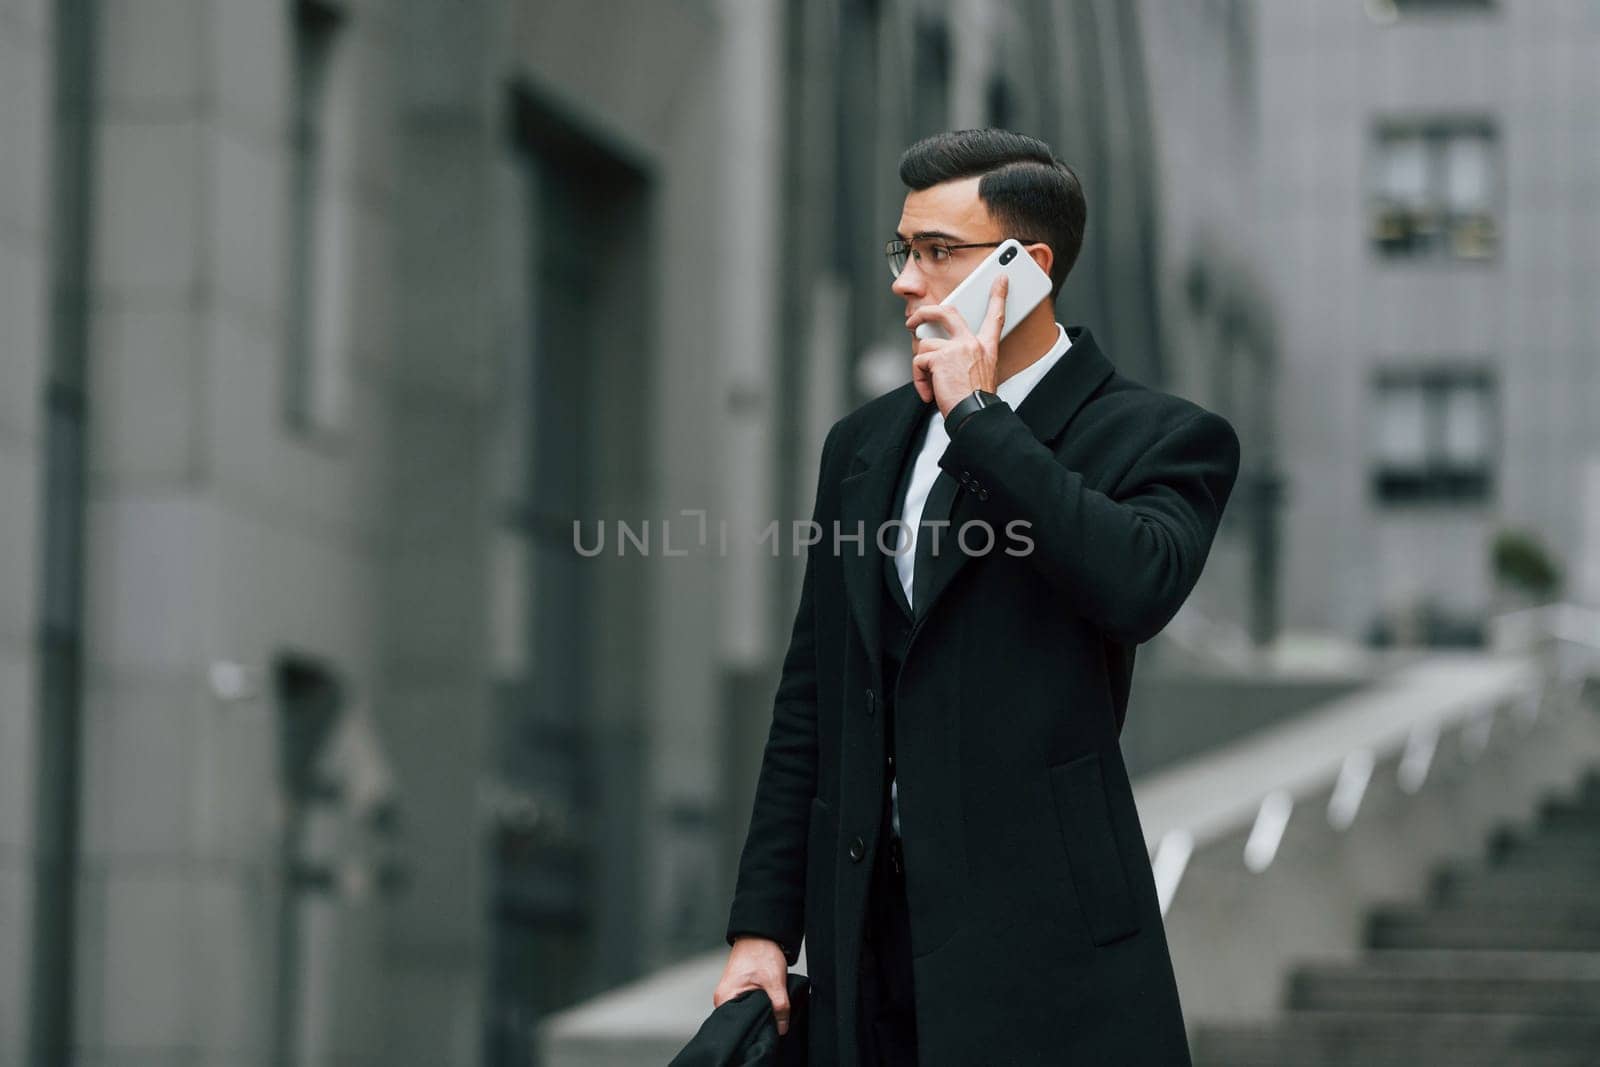 Talking by phone. Businessman in black suit and tie is outdoors in the city by Standret